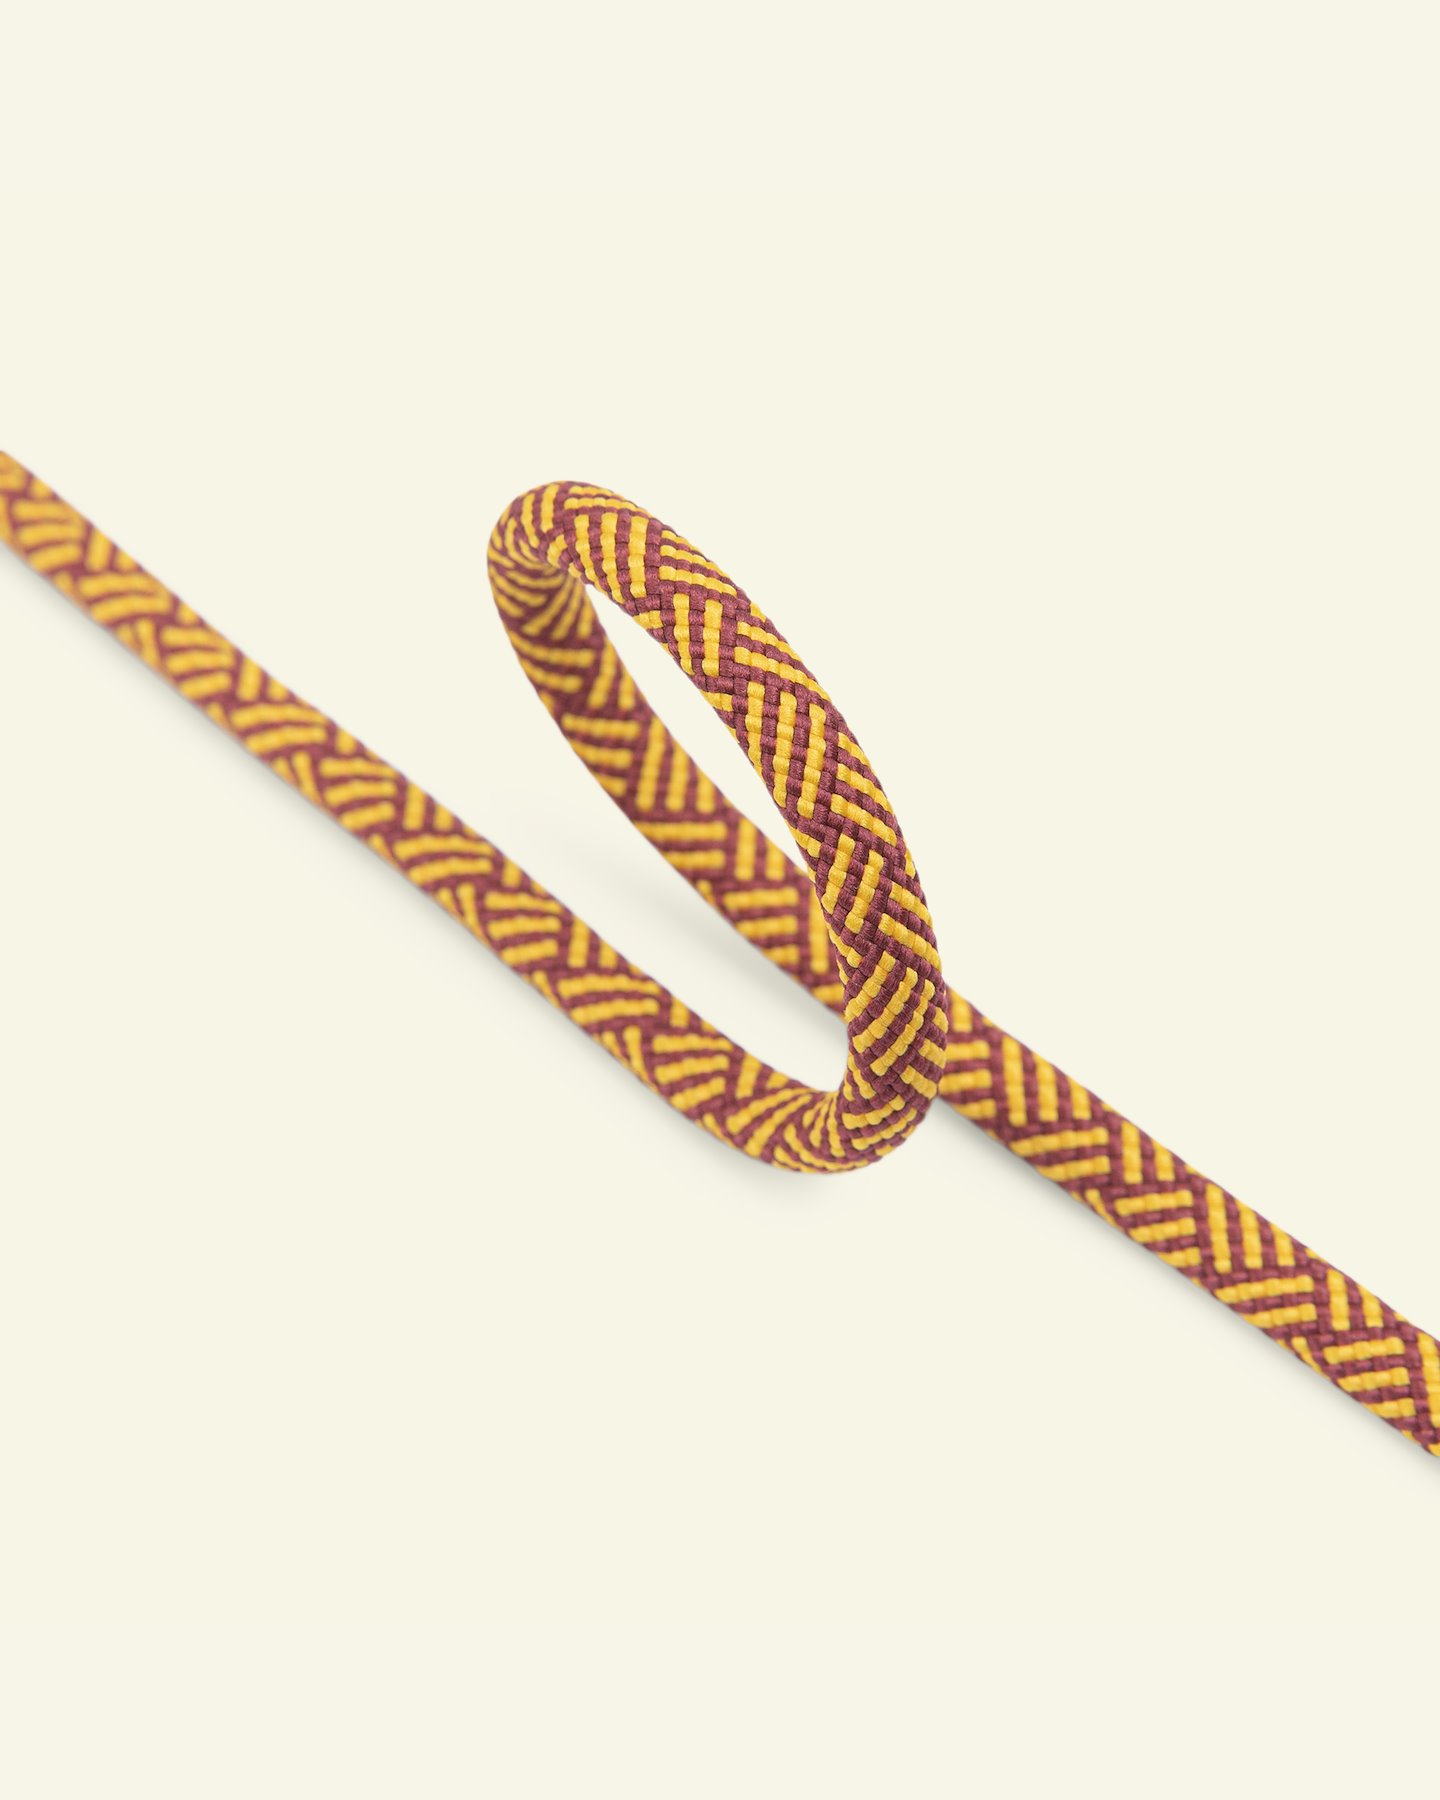 Paracord 8mm weinrot/orange 3m 22466_pack.png